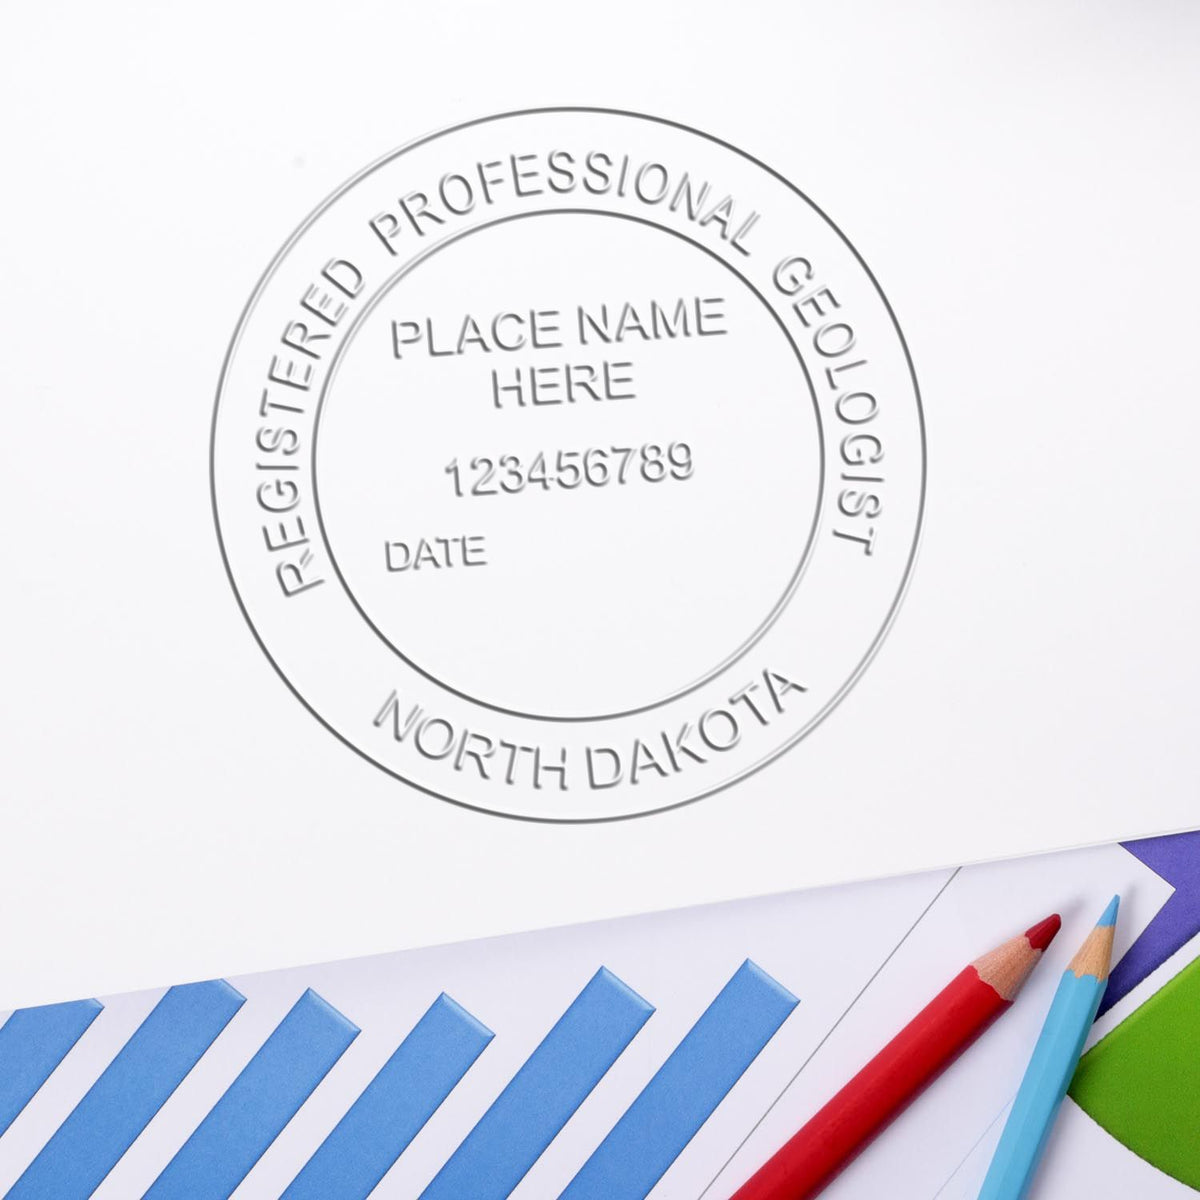 An alternative view of the Soft North Dakota Professional Geologist Seal stamped on a sheet of paper showing the image in use